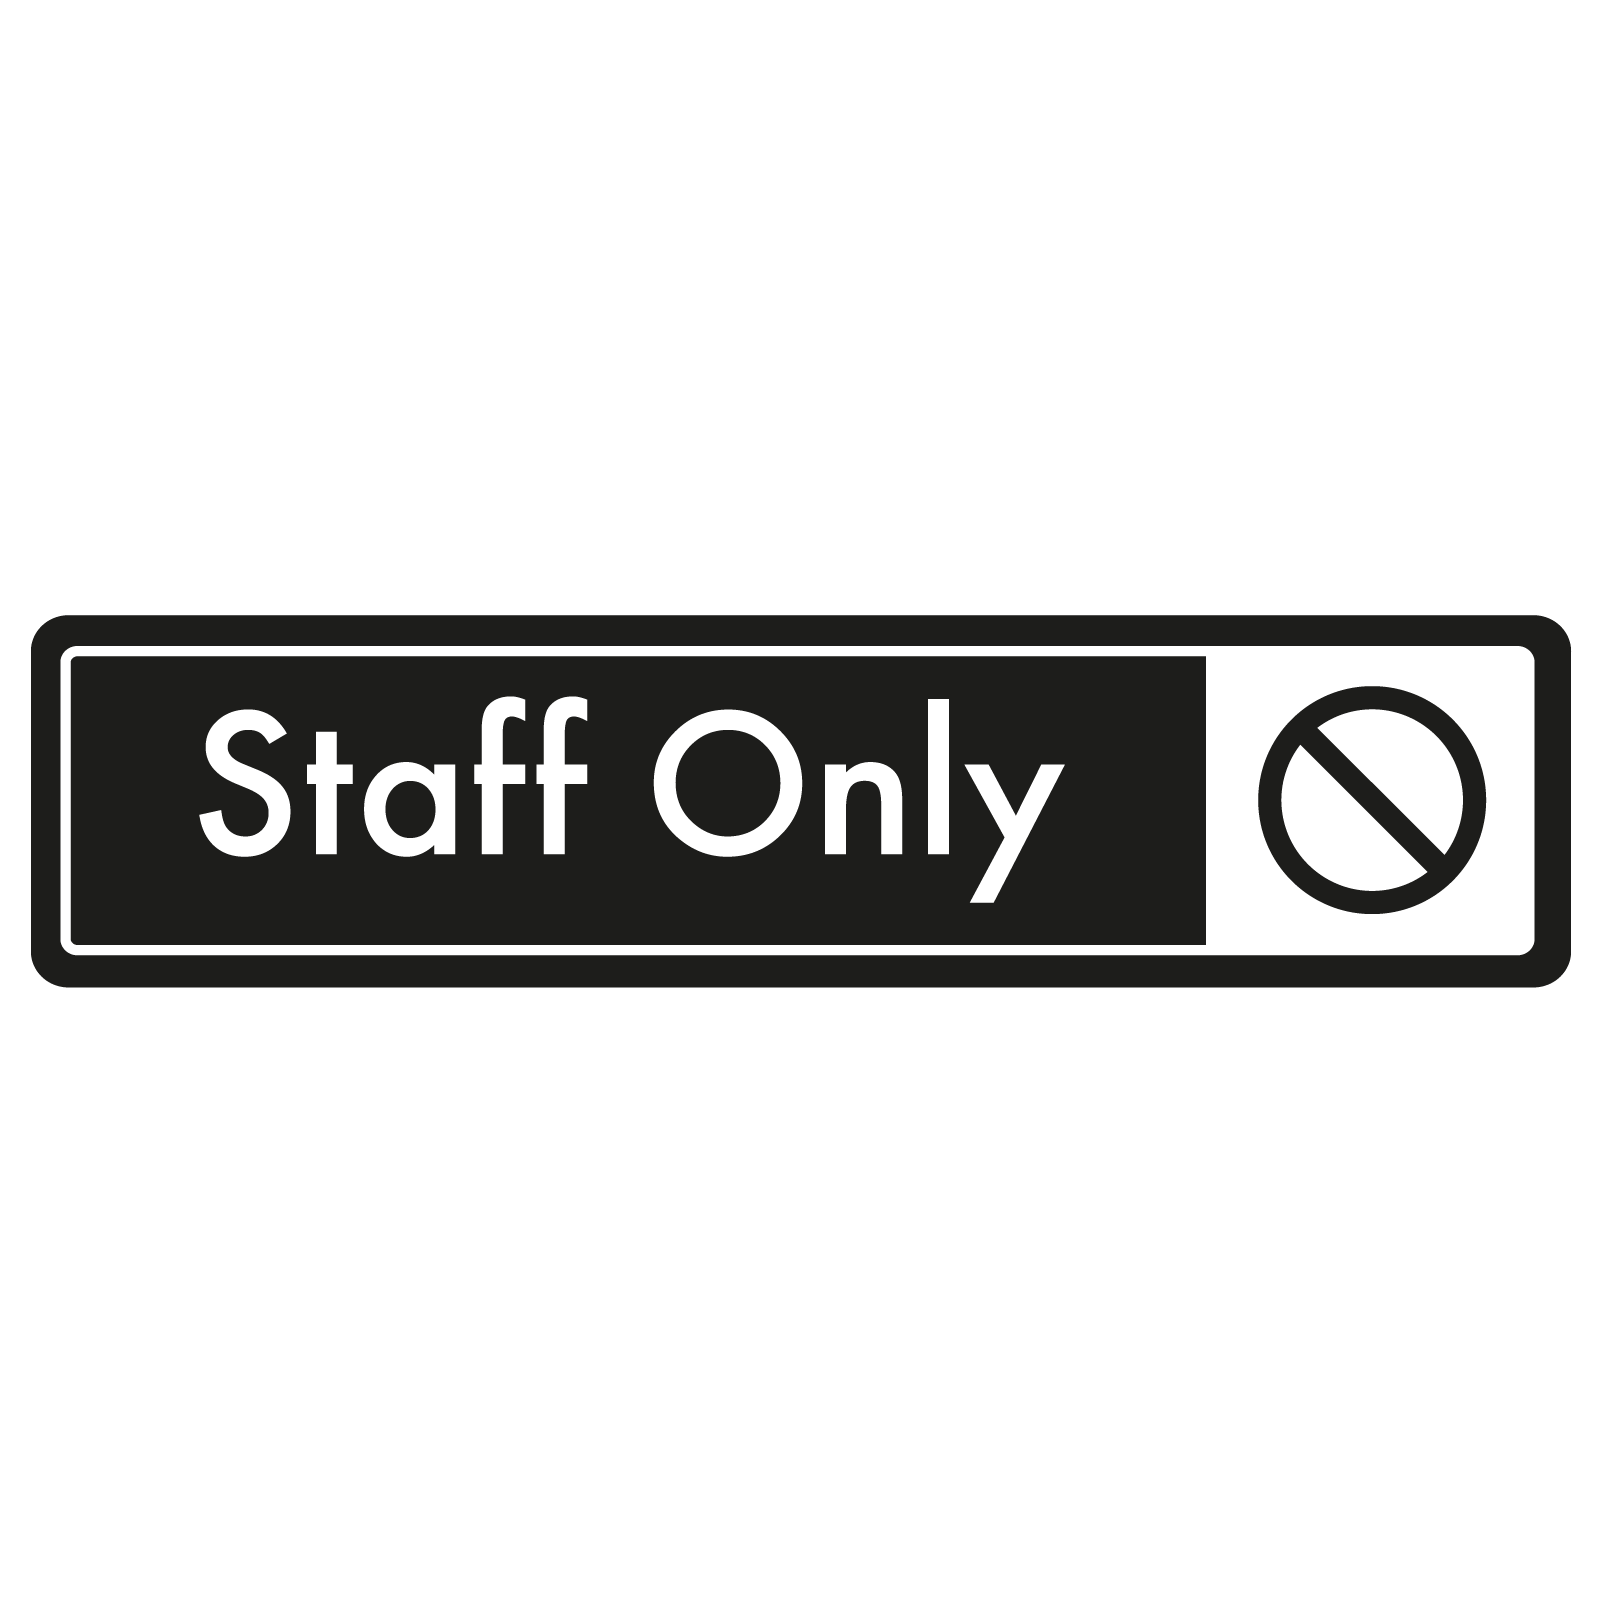 Staff Only Door Sign - White on Black